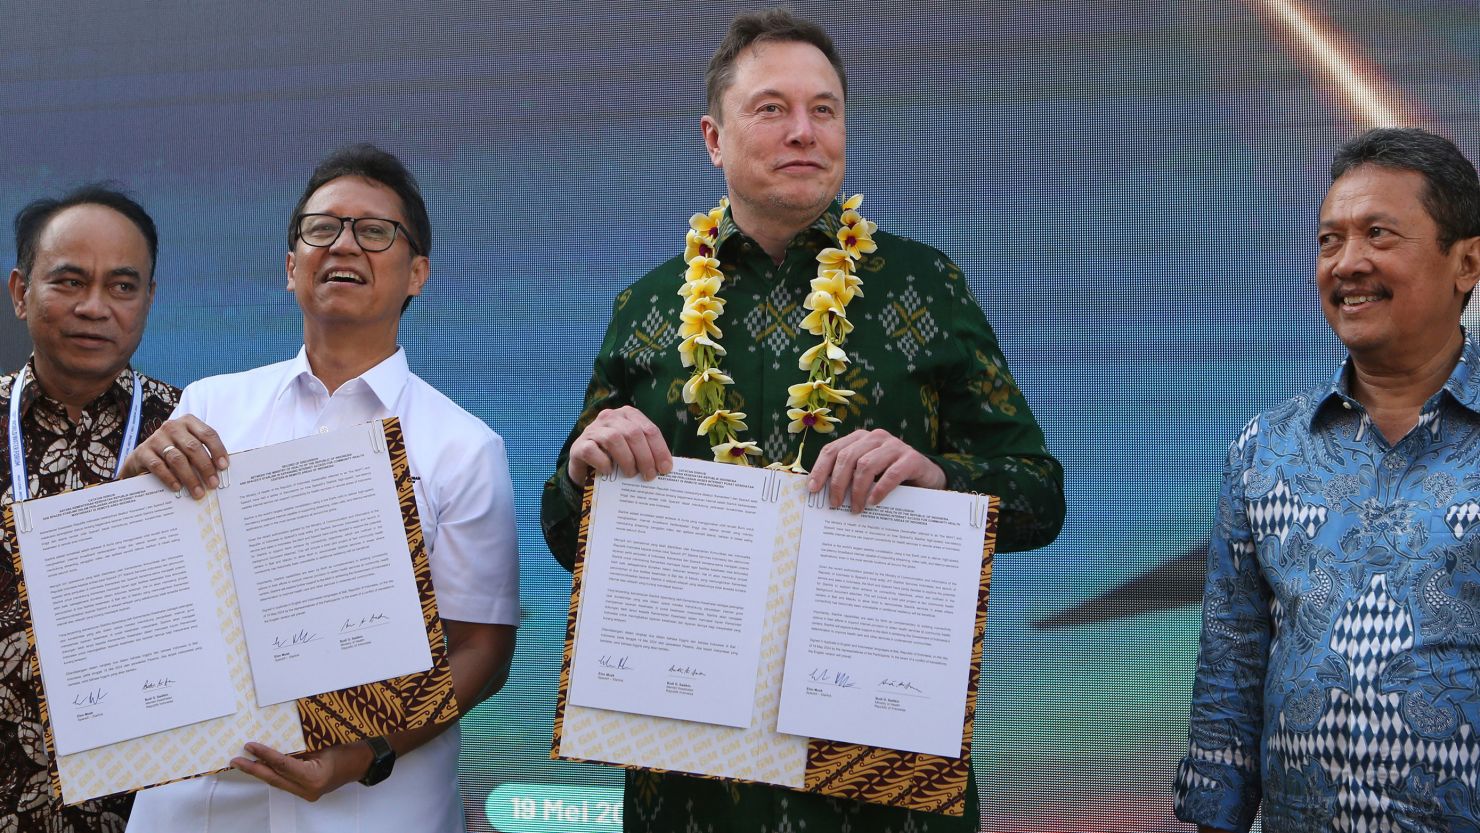 Indonesian Minister of Health Budi Gunadi Sadikin, second from left, and Elon Musk, second from right, sign an agreement on enhancing connectivity at a public health center in Denpasar, Bali, Indonesia on May 19, 2024.